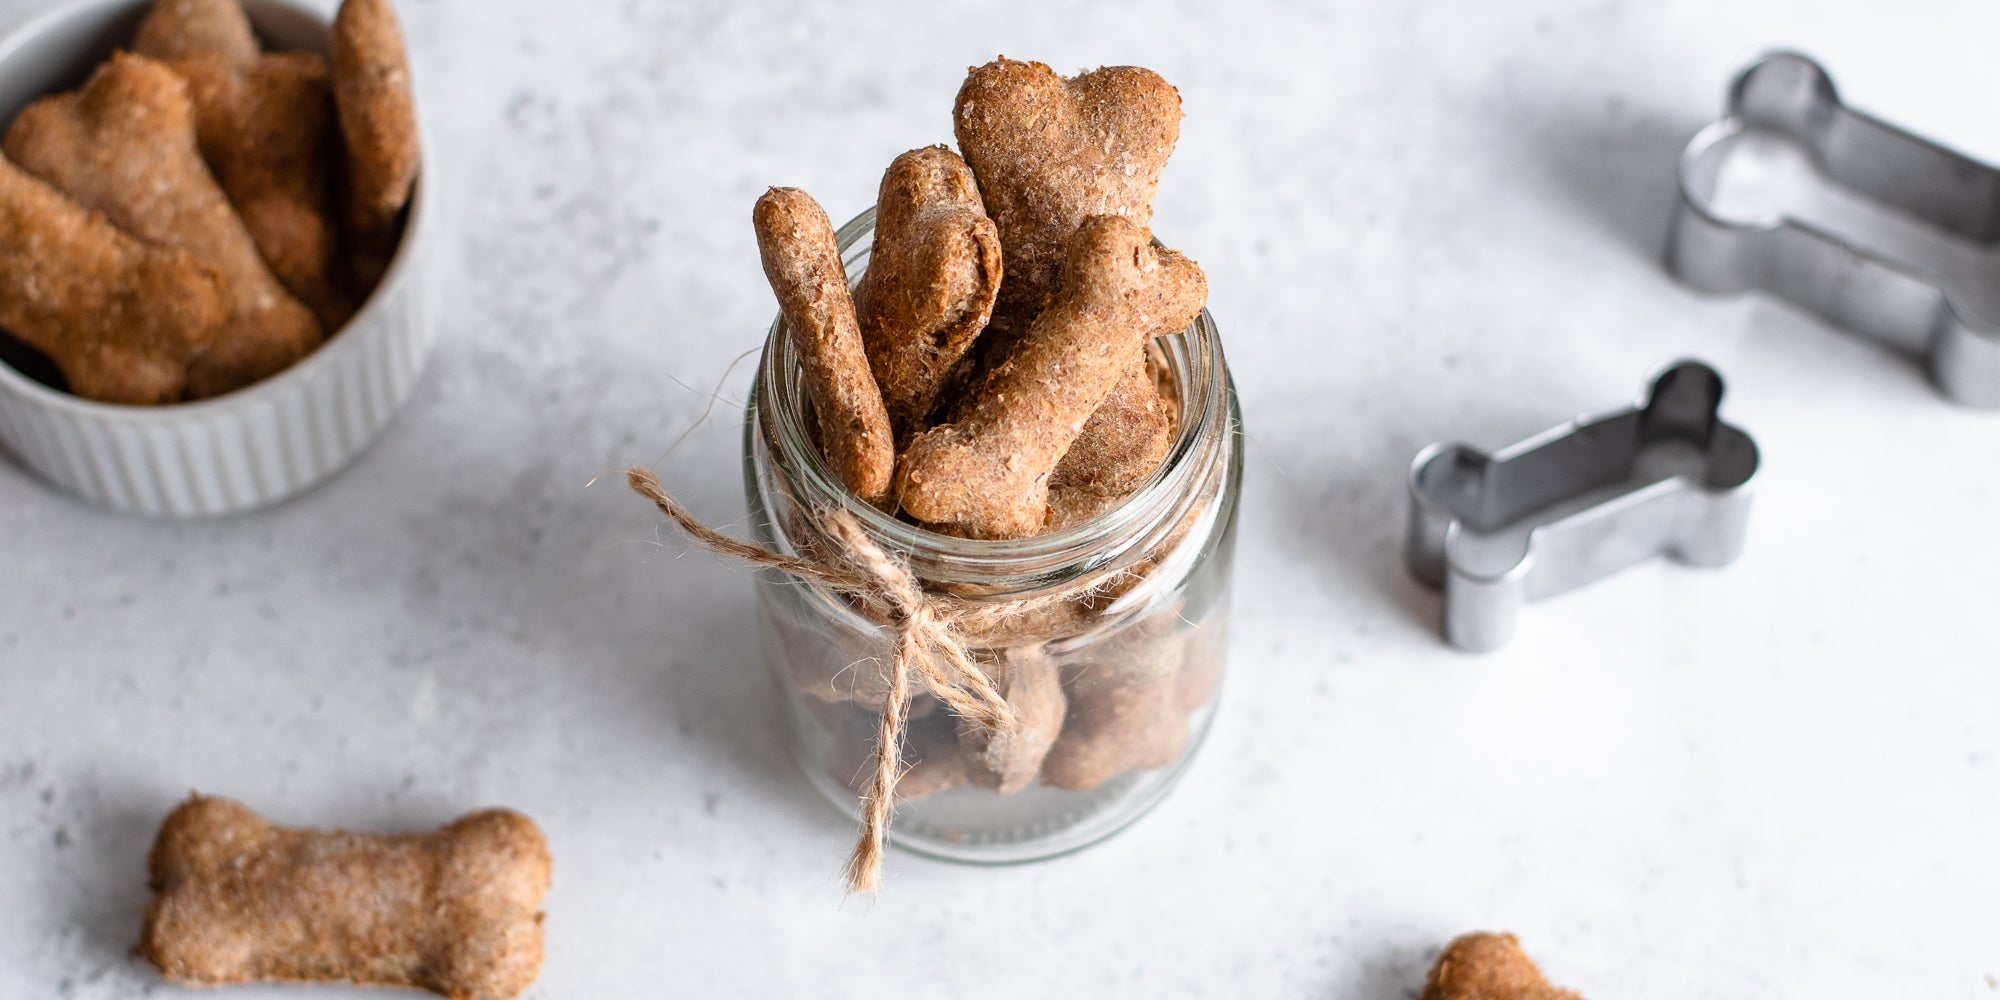 Dog Biscuits in a glass jar hand tied with twine, with dog biscuit cookie cutters